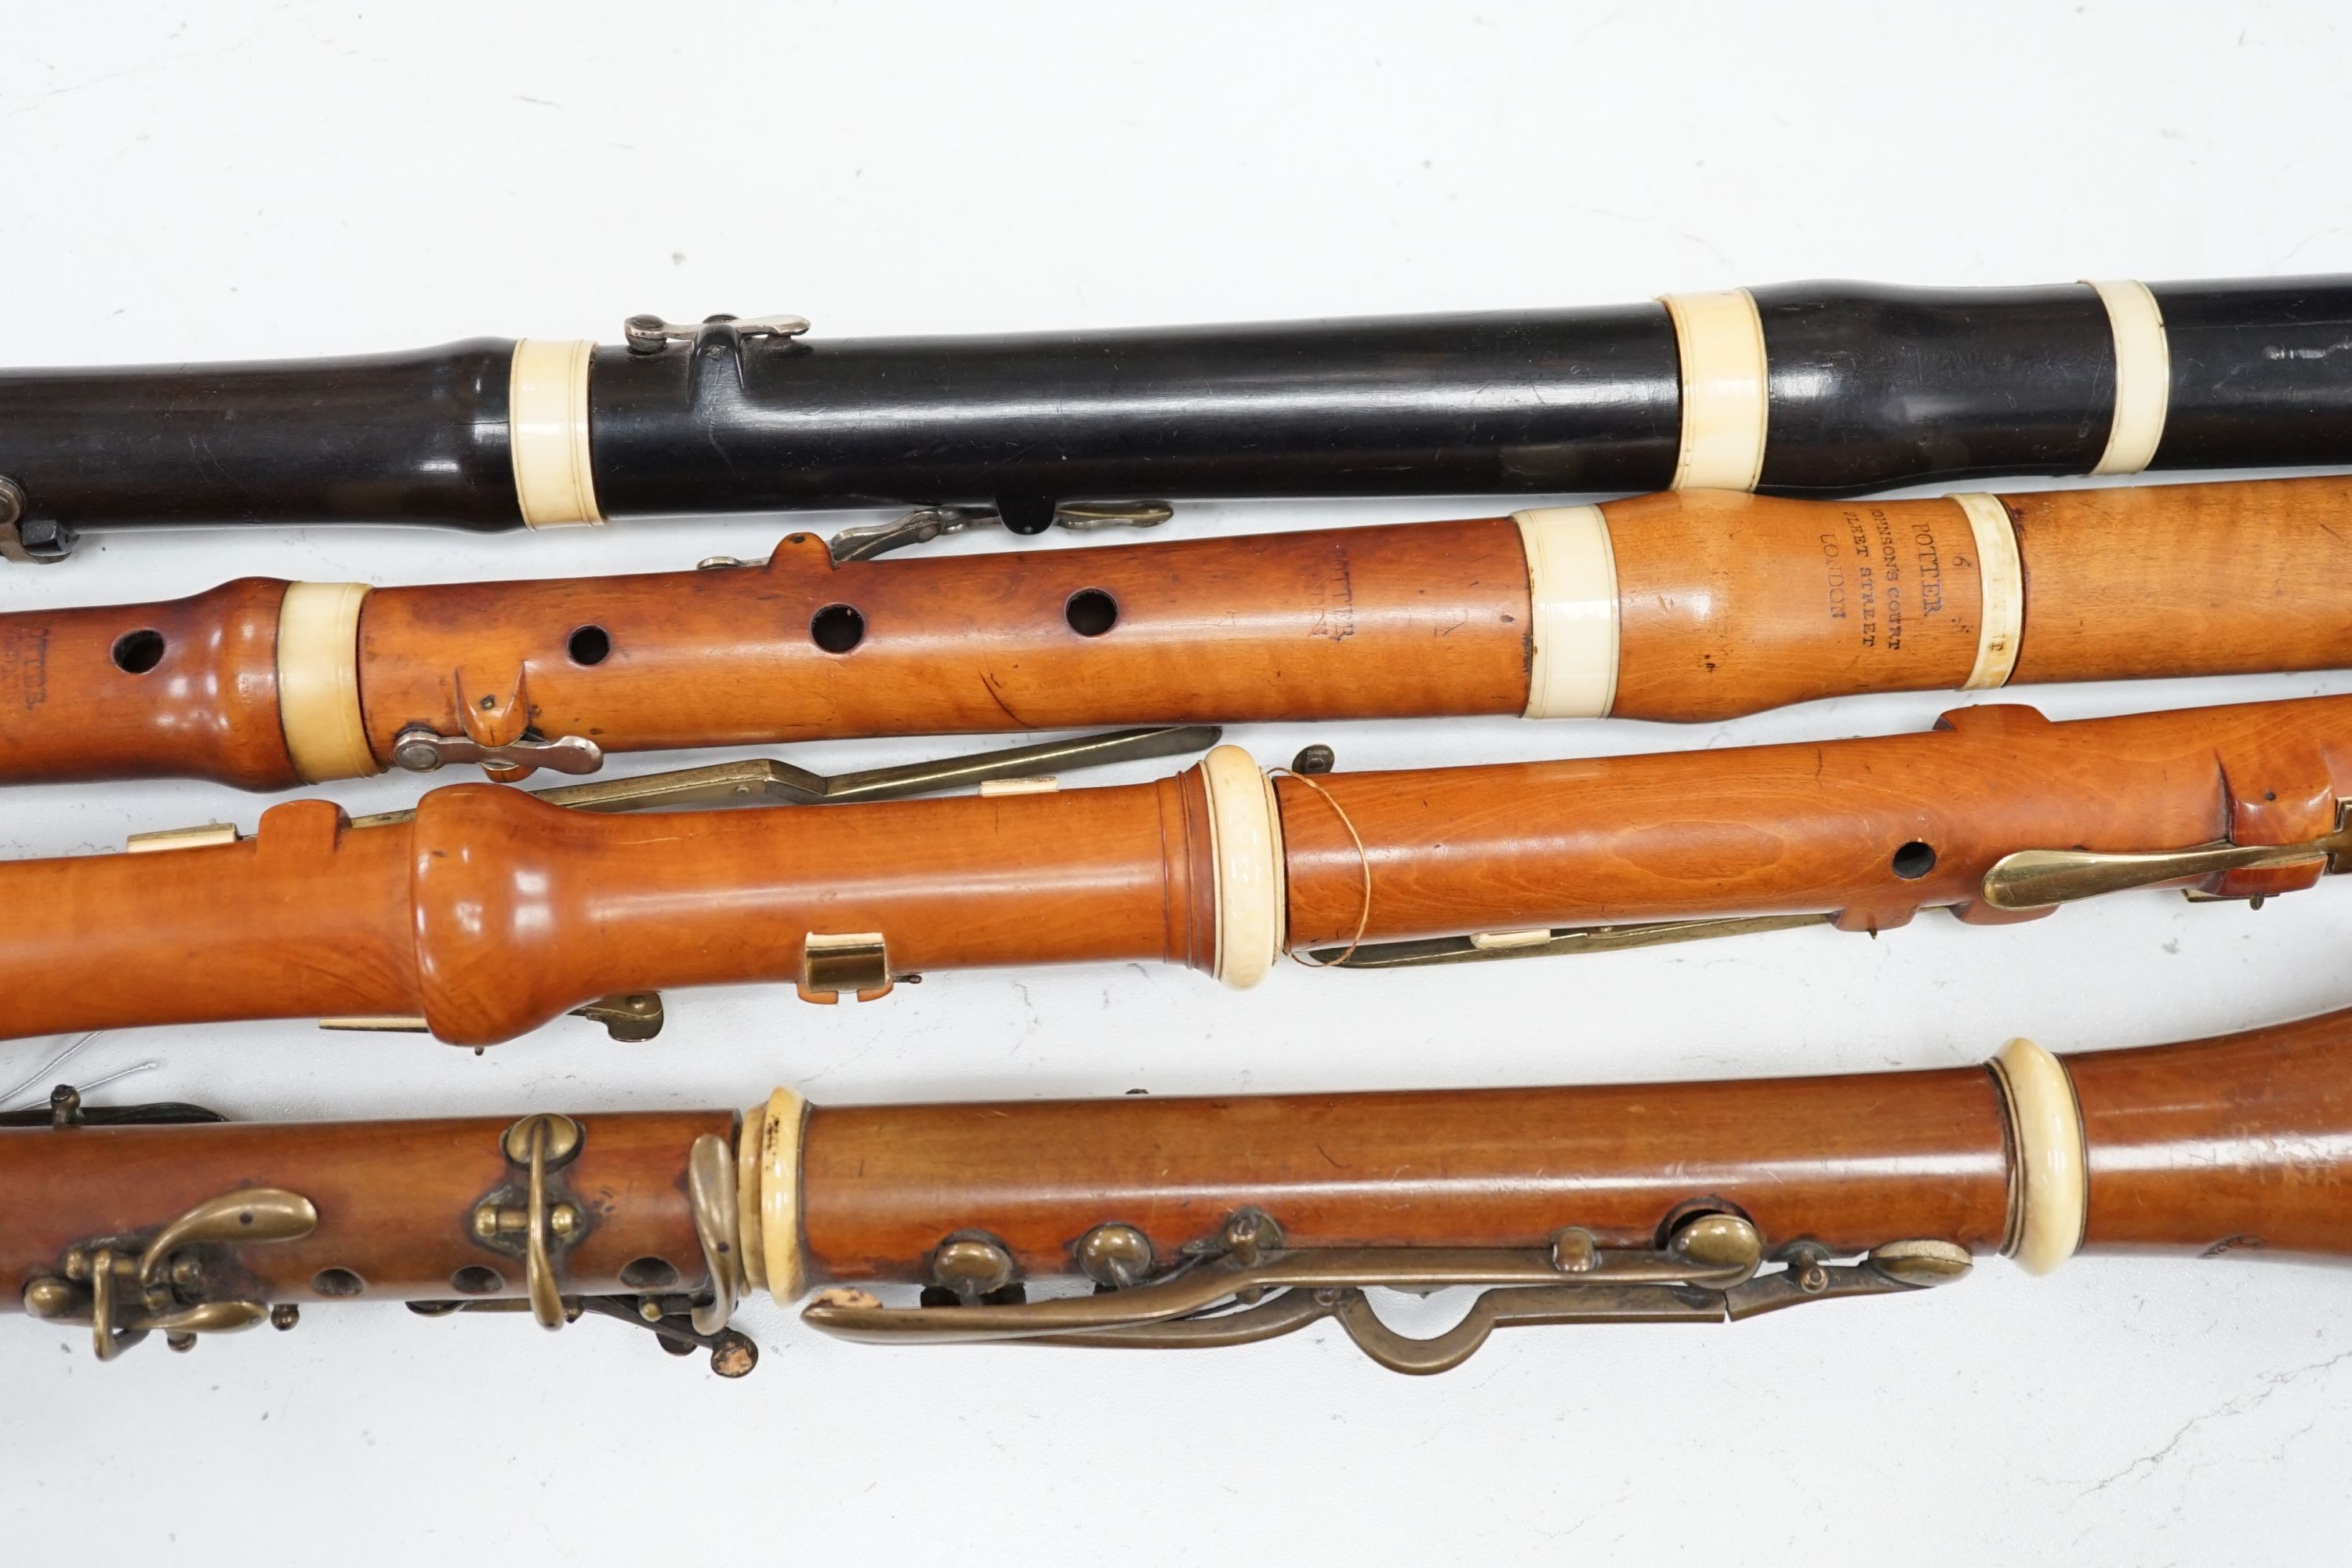 Two 19th century flutes by W. Potter, one in boxwood, the other ebony, and two 19th century boxwood clarinets, one by Dollard, the other by Lazarus